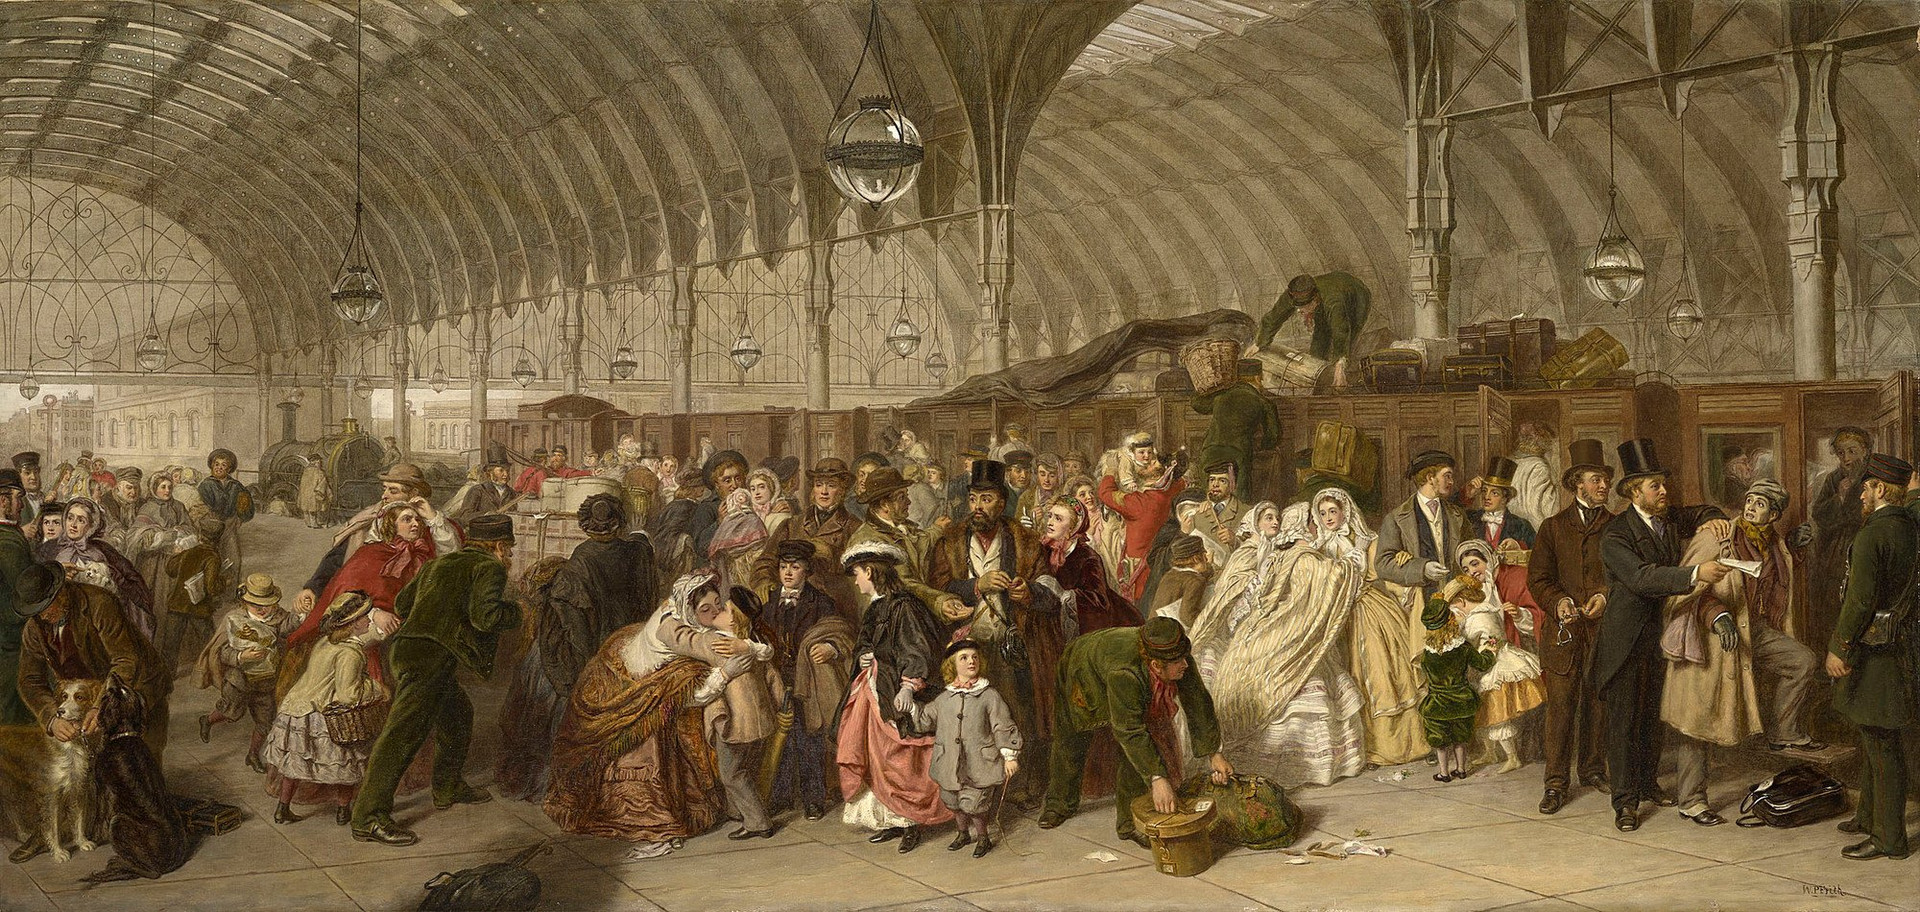 William Powell Frith. The Railway Station, 1862.